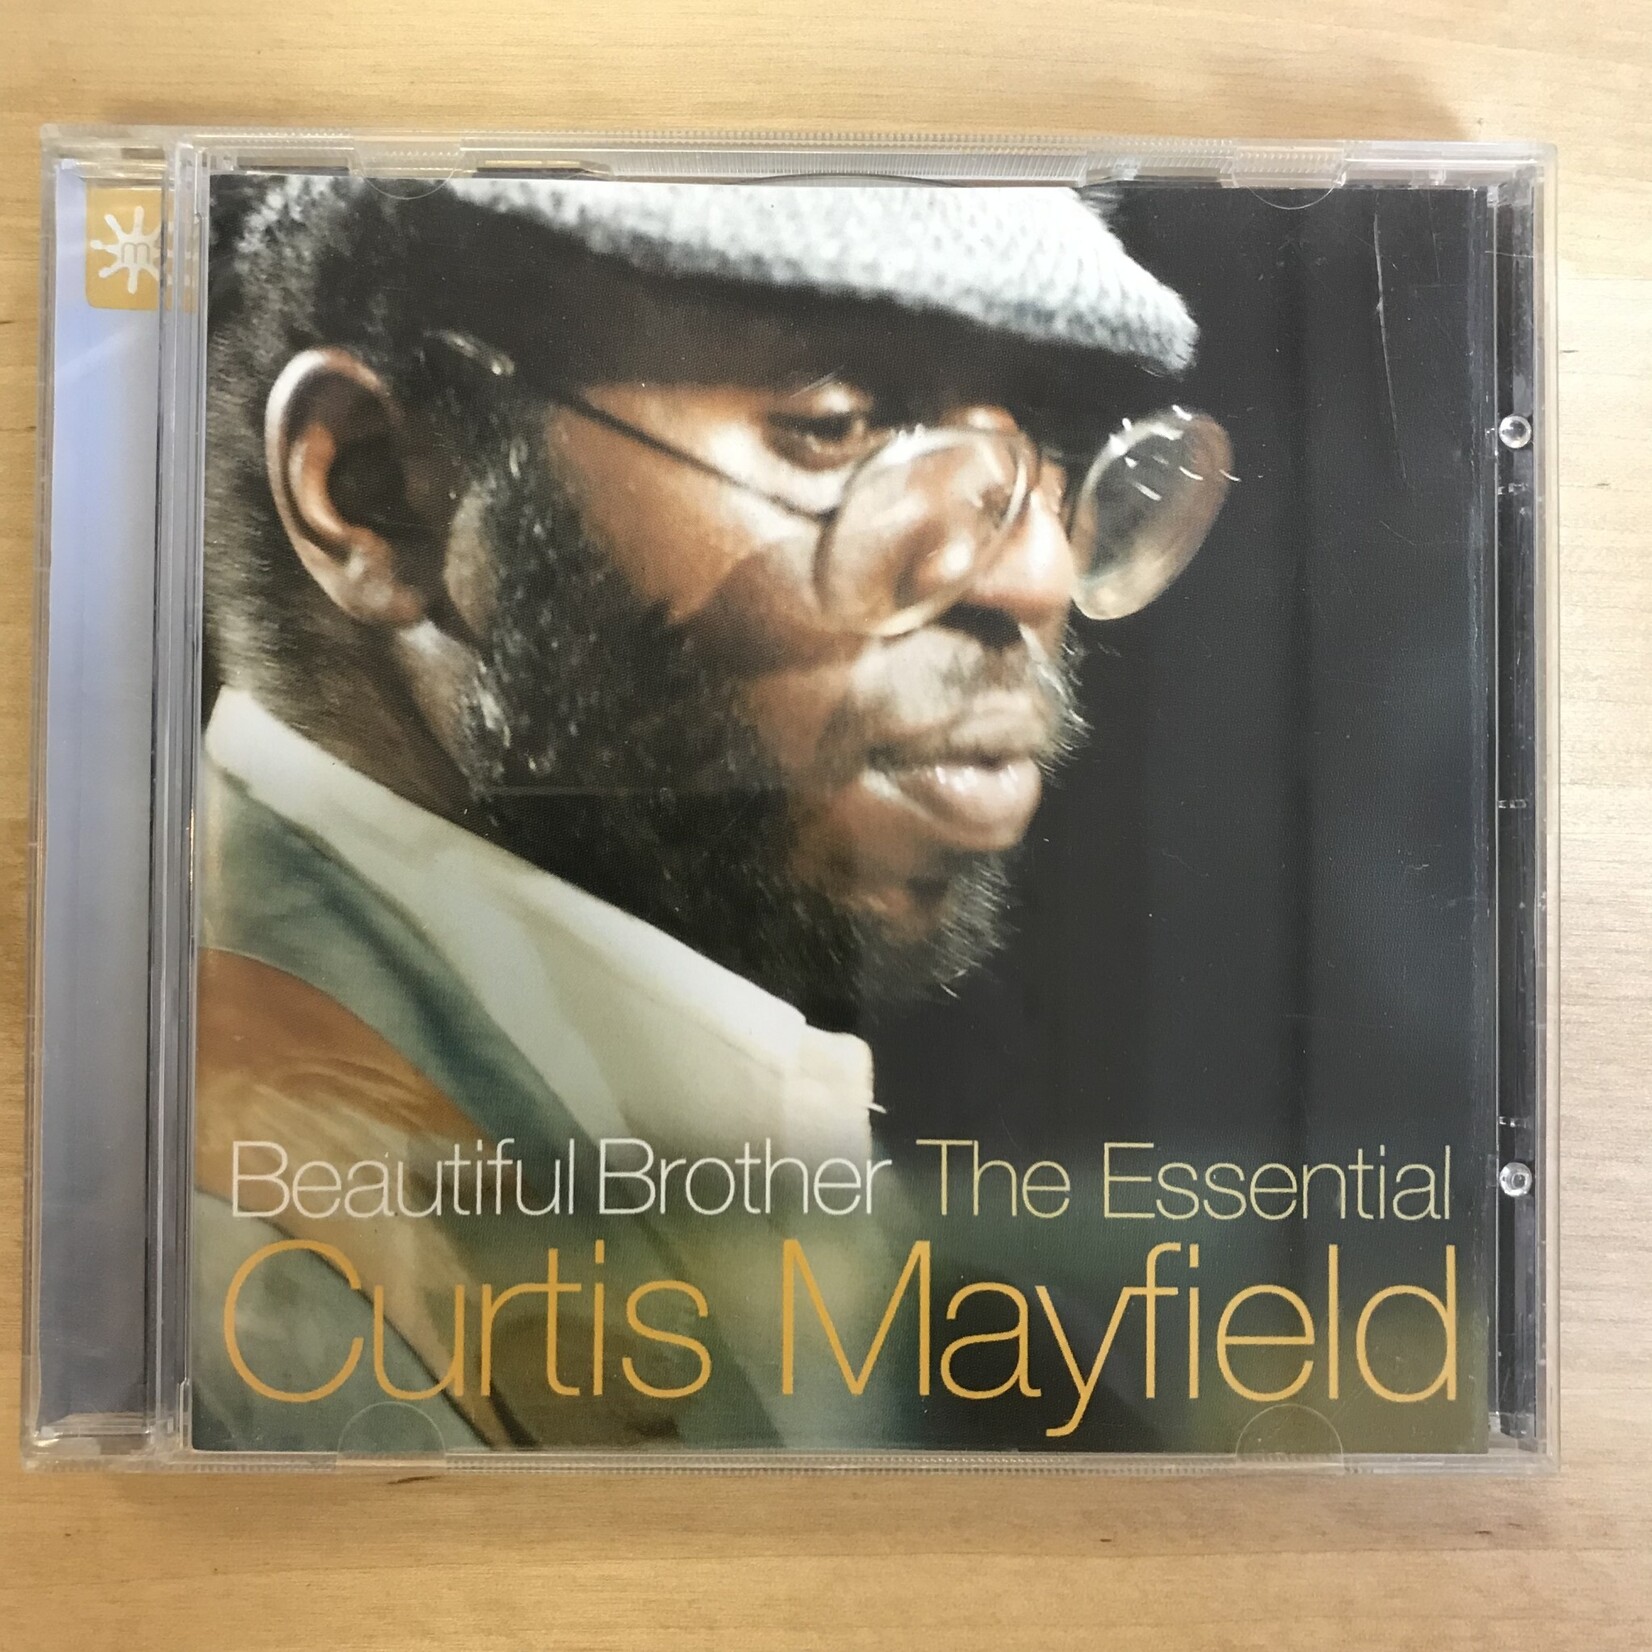 Curtis Mayfield - Beautiful Brother: The Essential Curtis Mayfield - CD (USED)